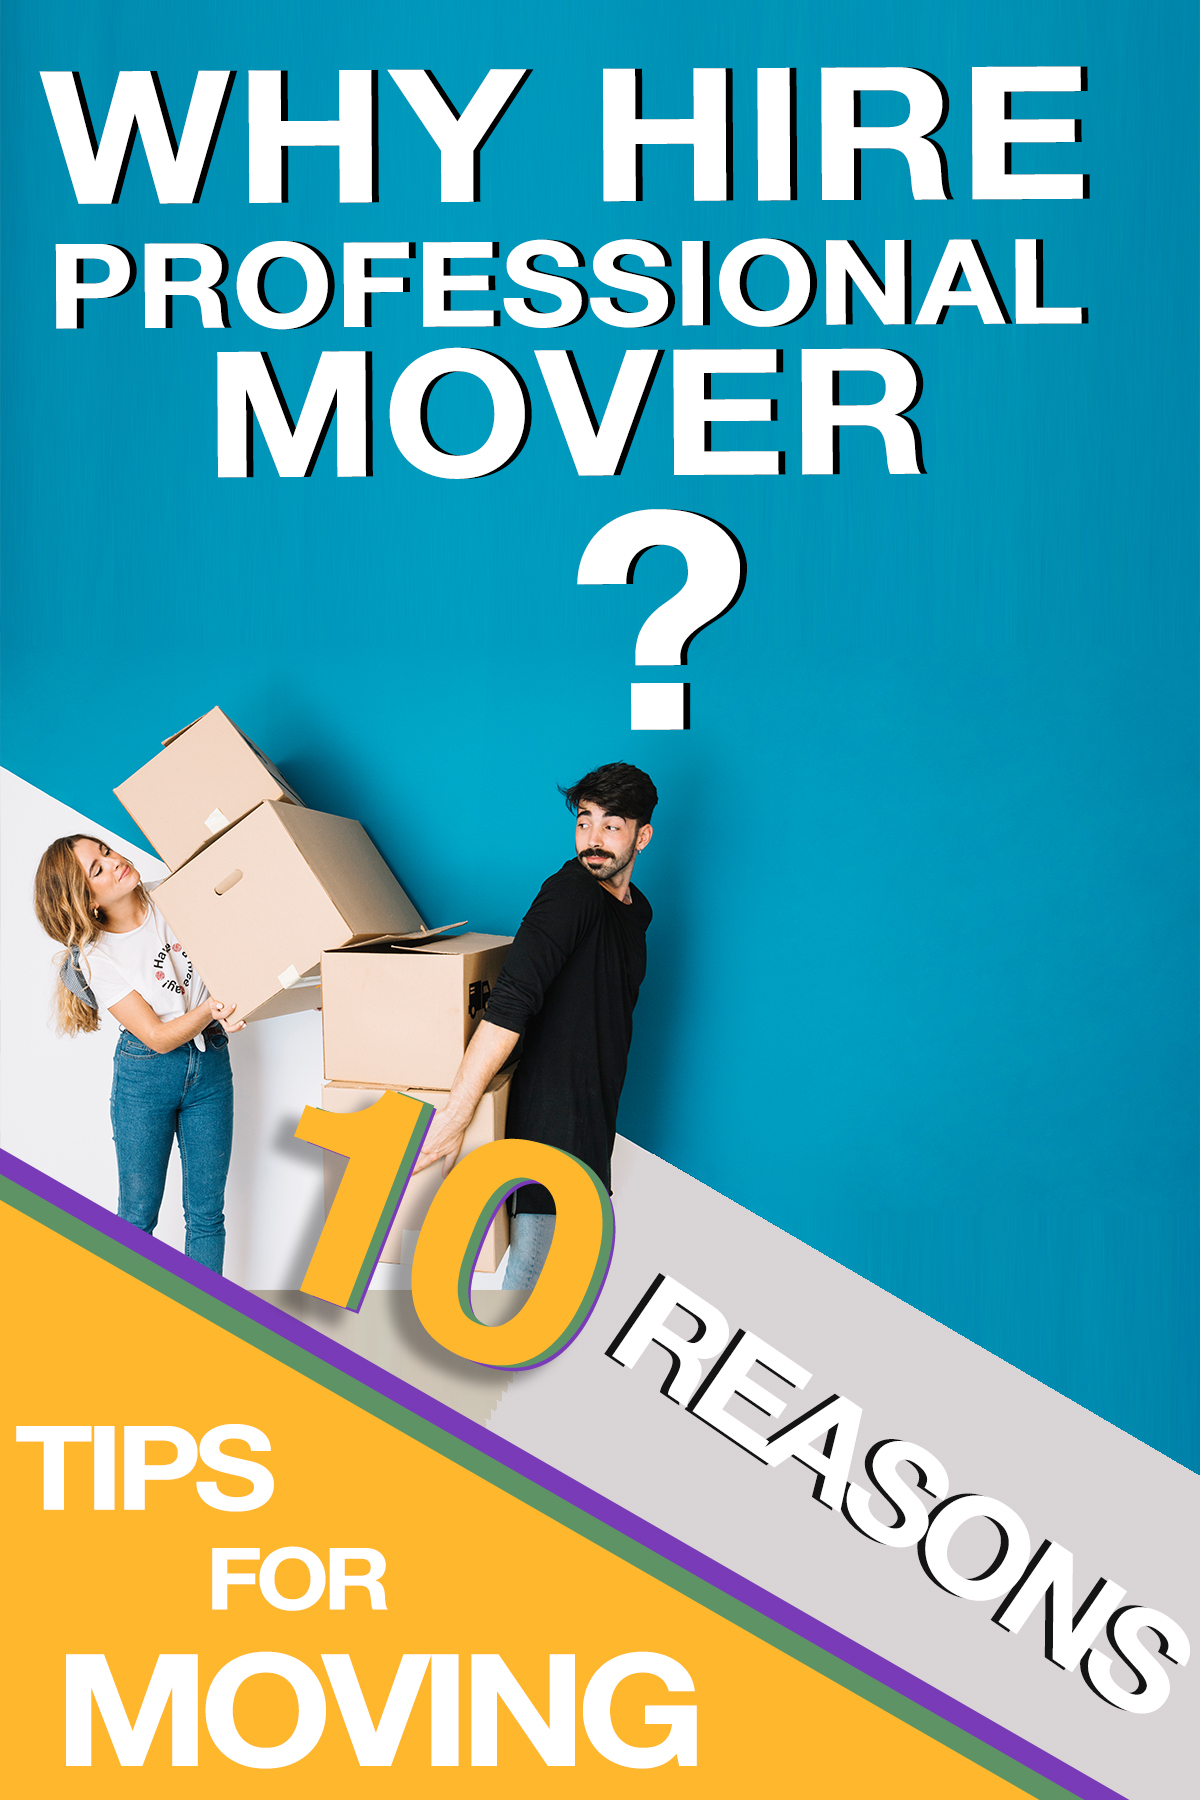 10 reasons to hire a professional mover